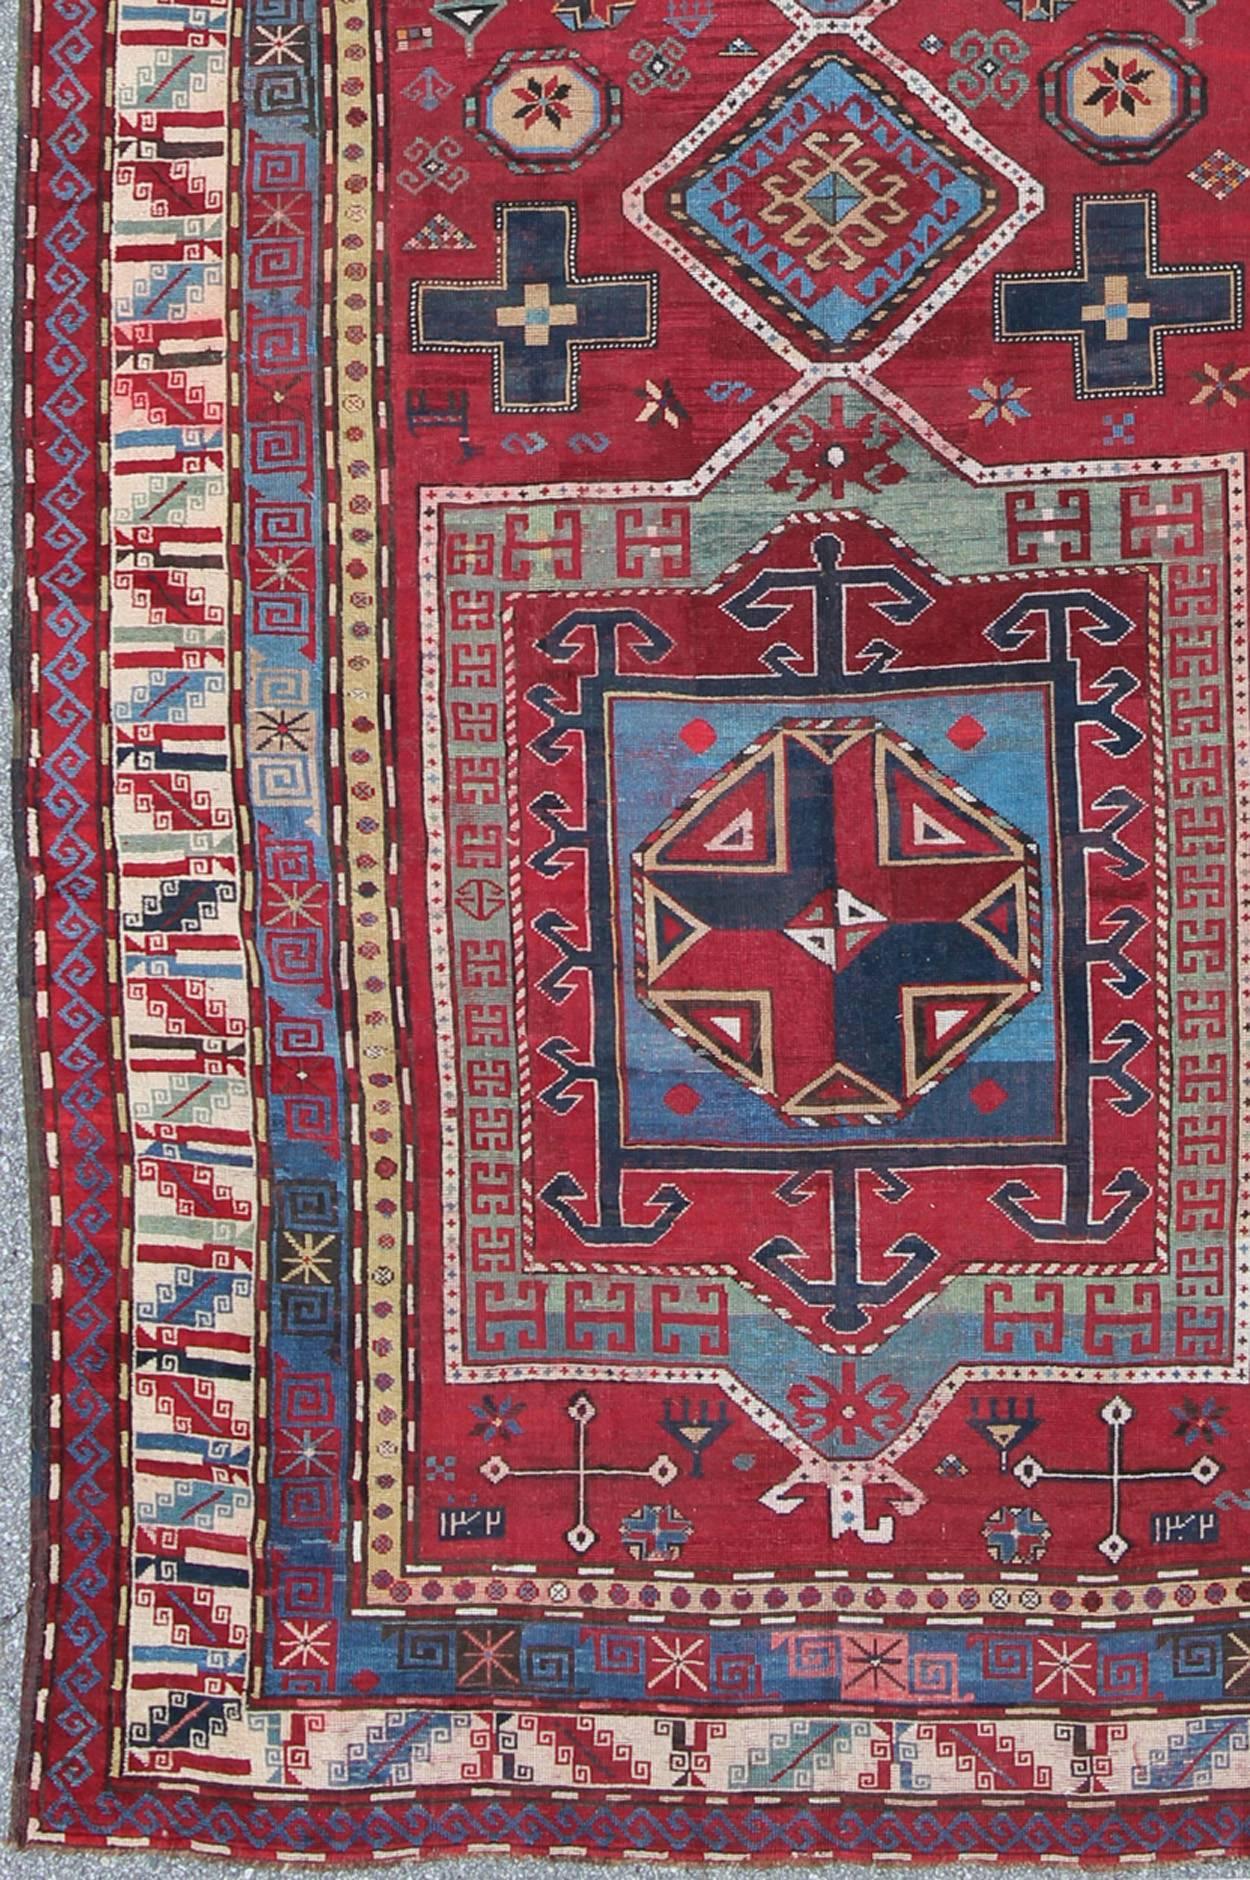 Antique Caucasus Kazak Carpet with Dual Geometric Medallions.
This stunning 19th century Kazak rug from the Caucasus region displays magnificent, dual, geometric medallions and an all-over geometric design. A dynamic palette of red, blue, ivory,